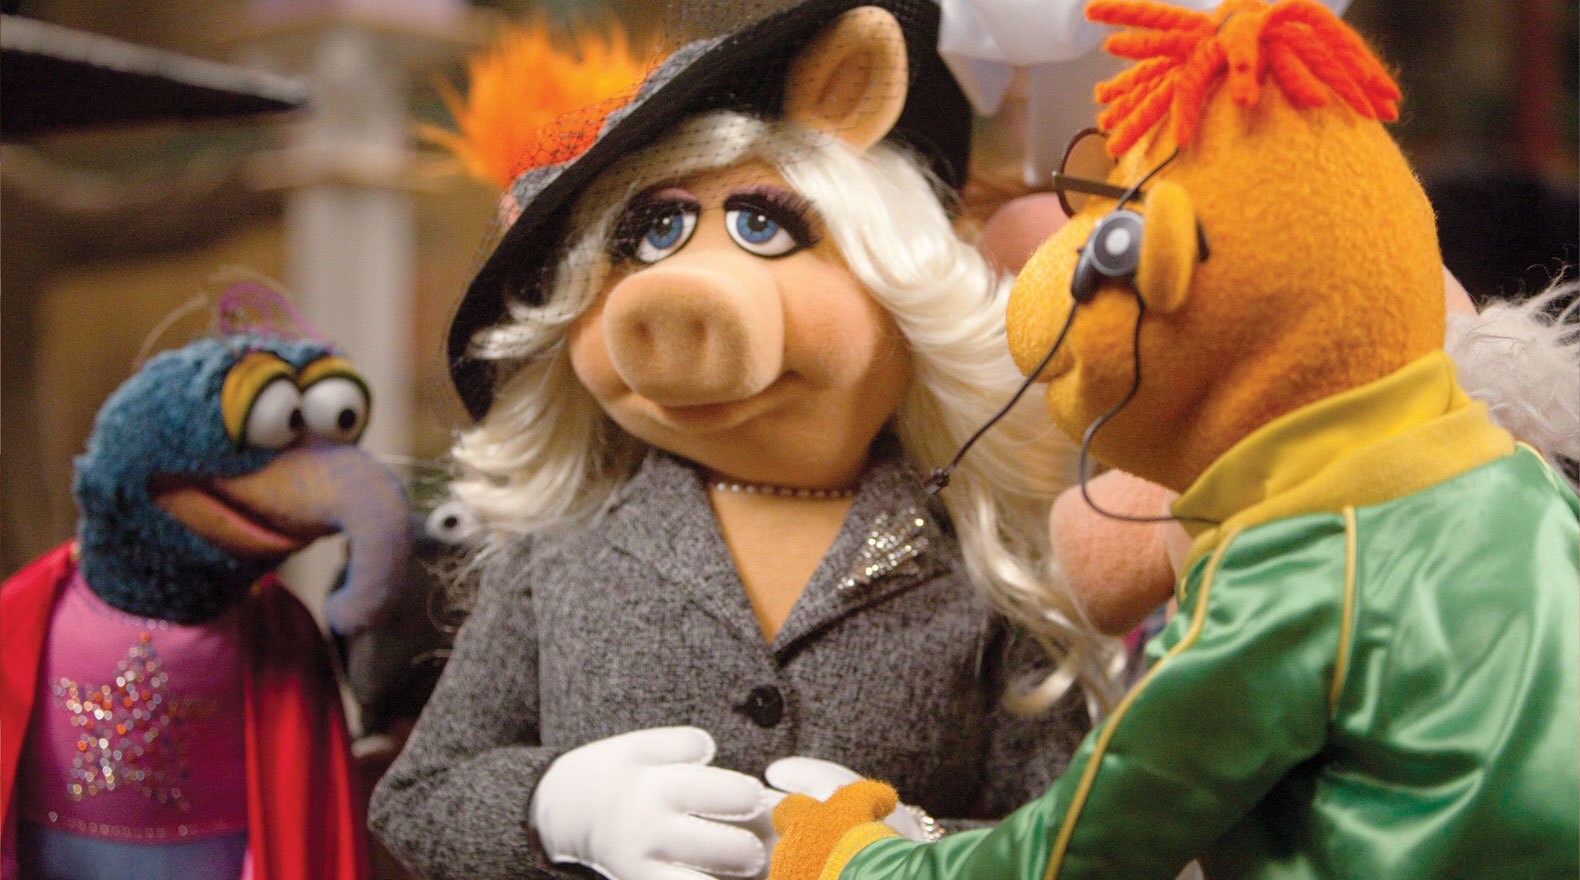 Miss Piggy is back and ready to take the stage.